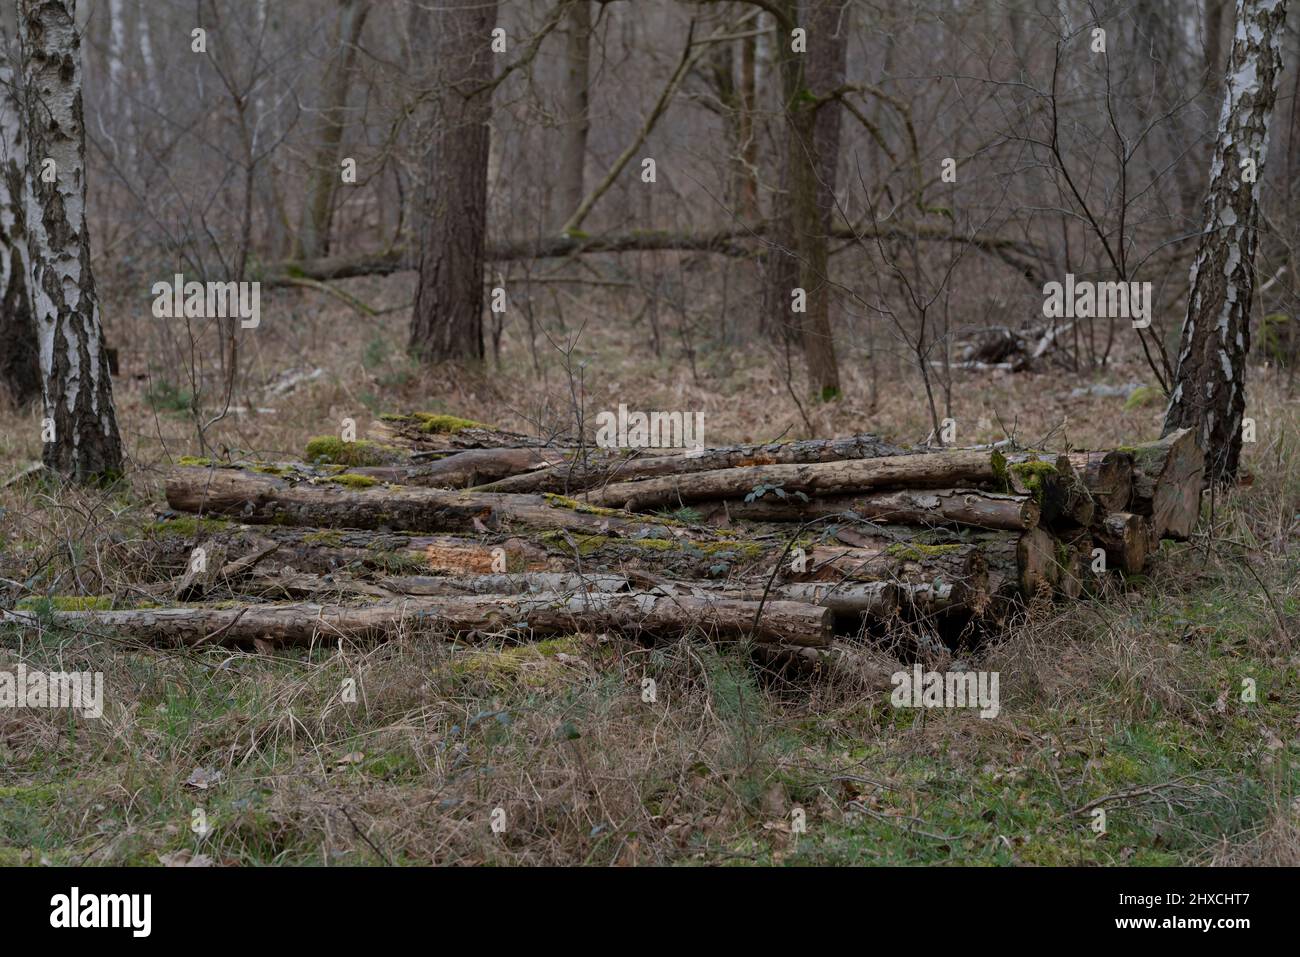 Tree trunks of felled trees in a forest that were simply left behind, waste of resources Stock Photo